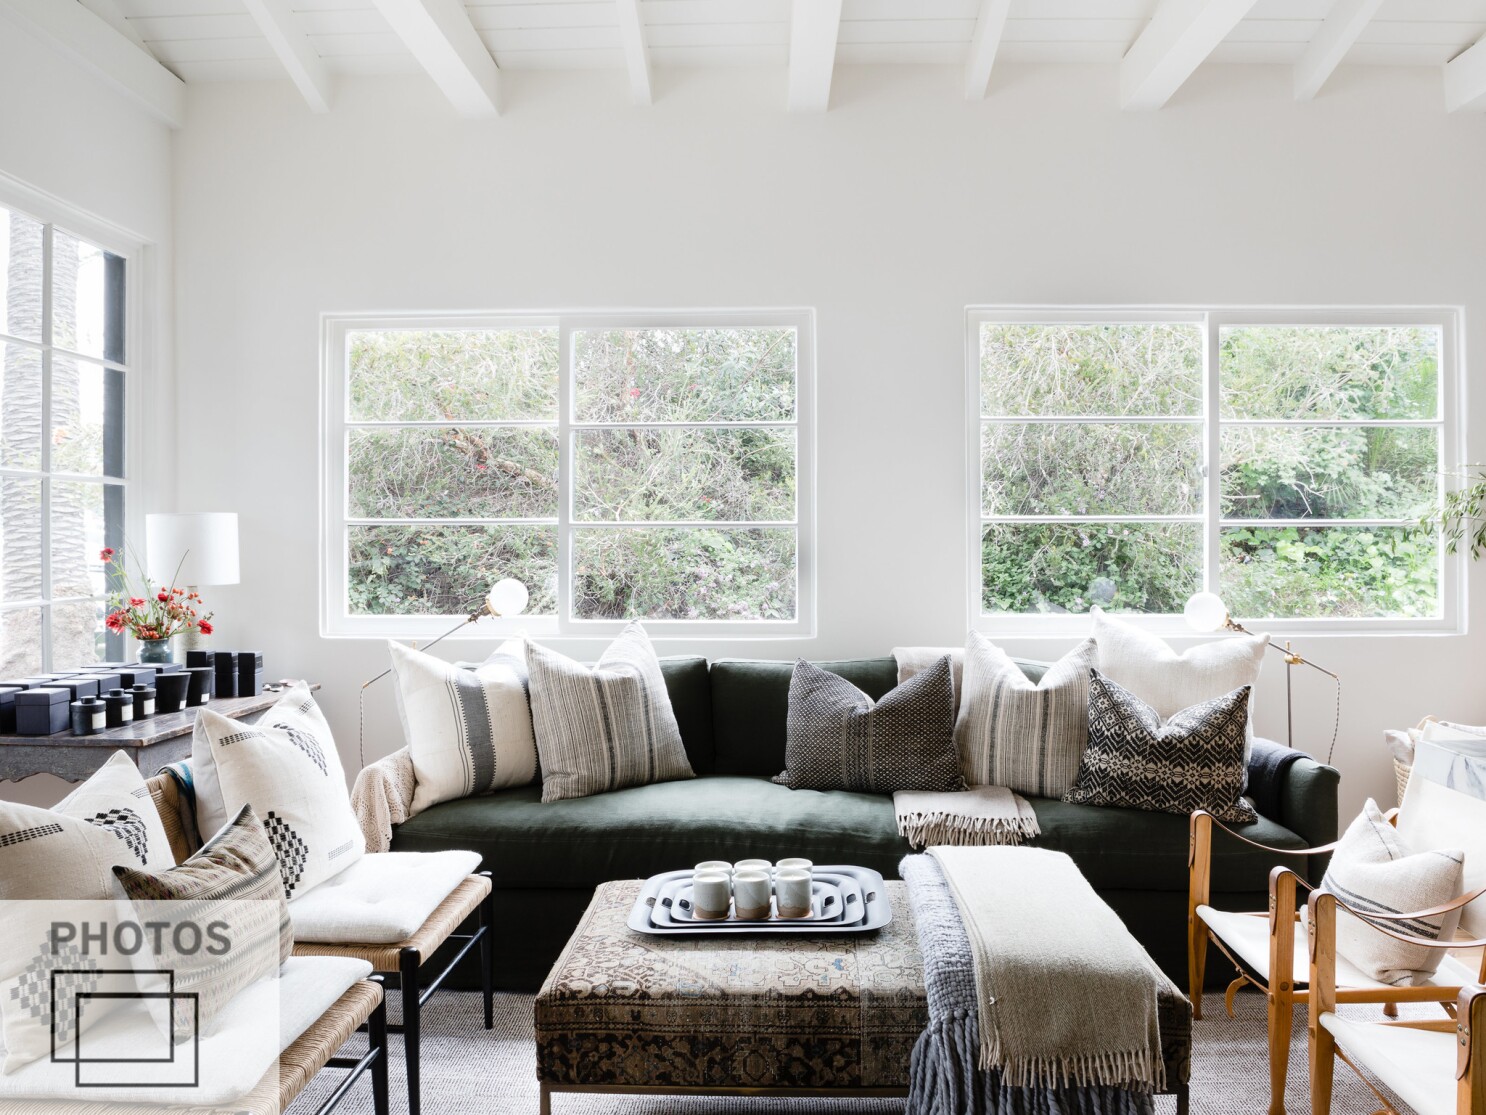 Interior designer expands her Instagram-ready brand into Pacific